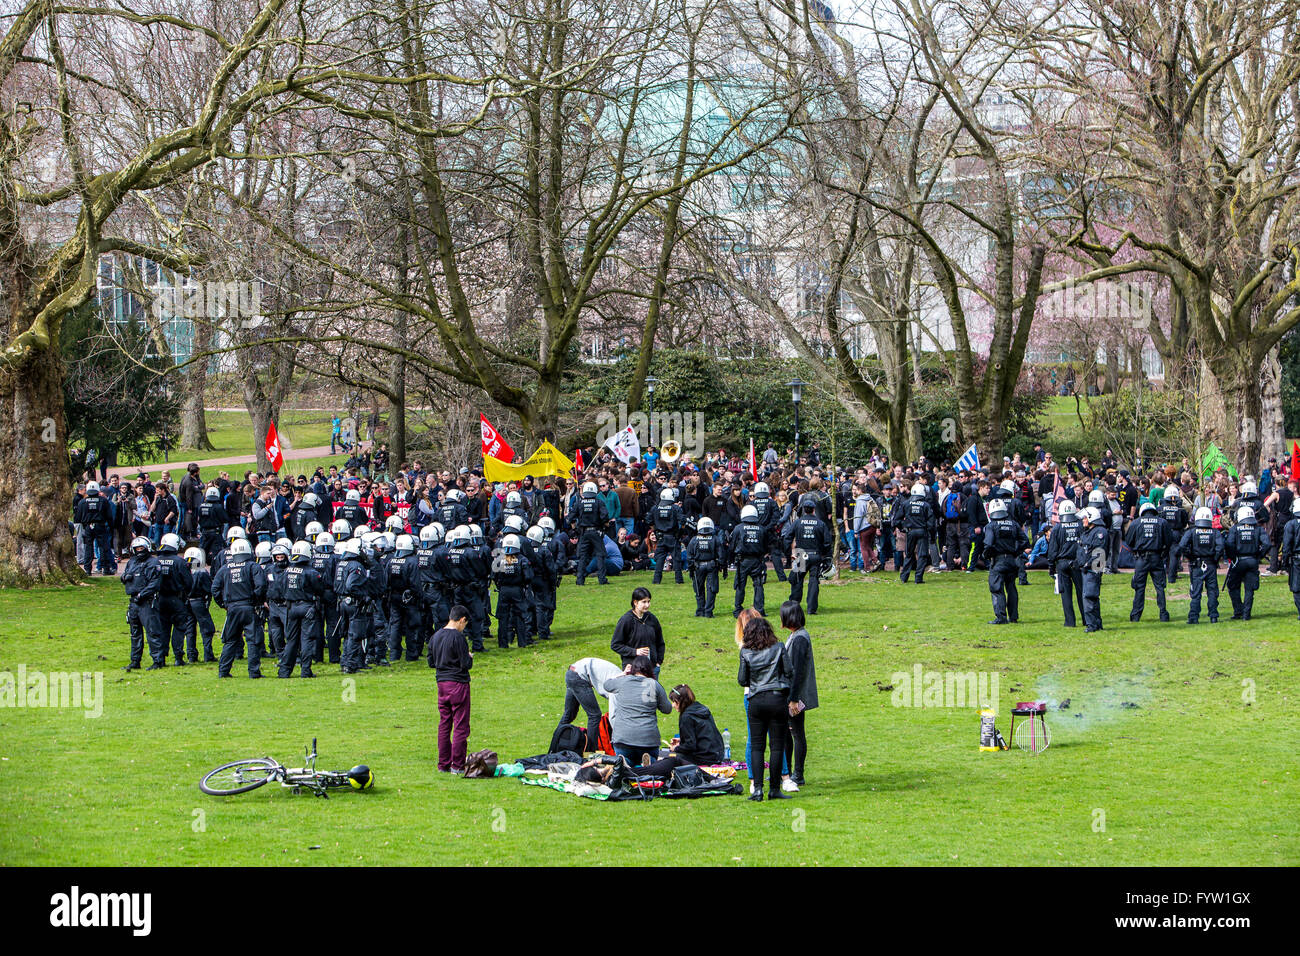 Demonstration of right wing, neo Nazi party NPD, in Essen, Germany, counter demonstration of left wing groups, police operation Stock Photo